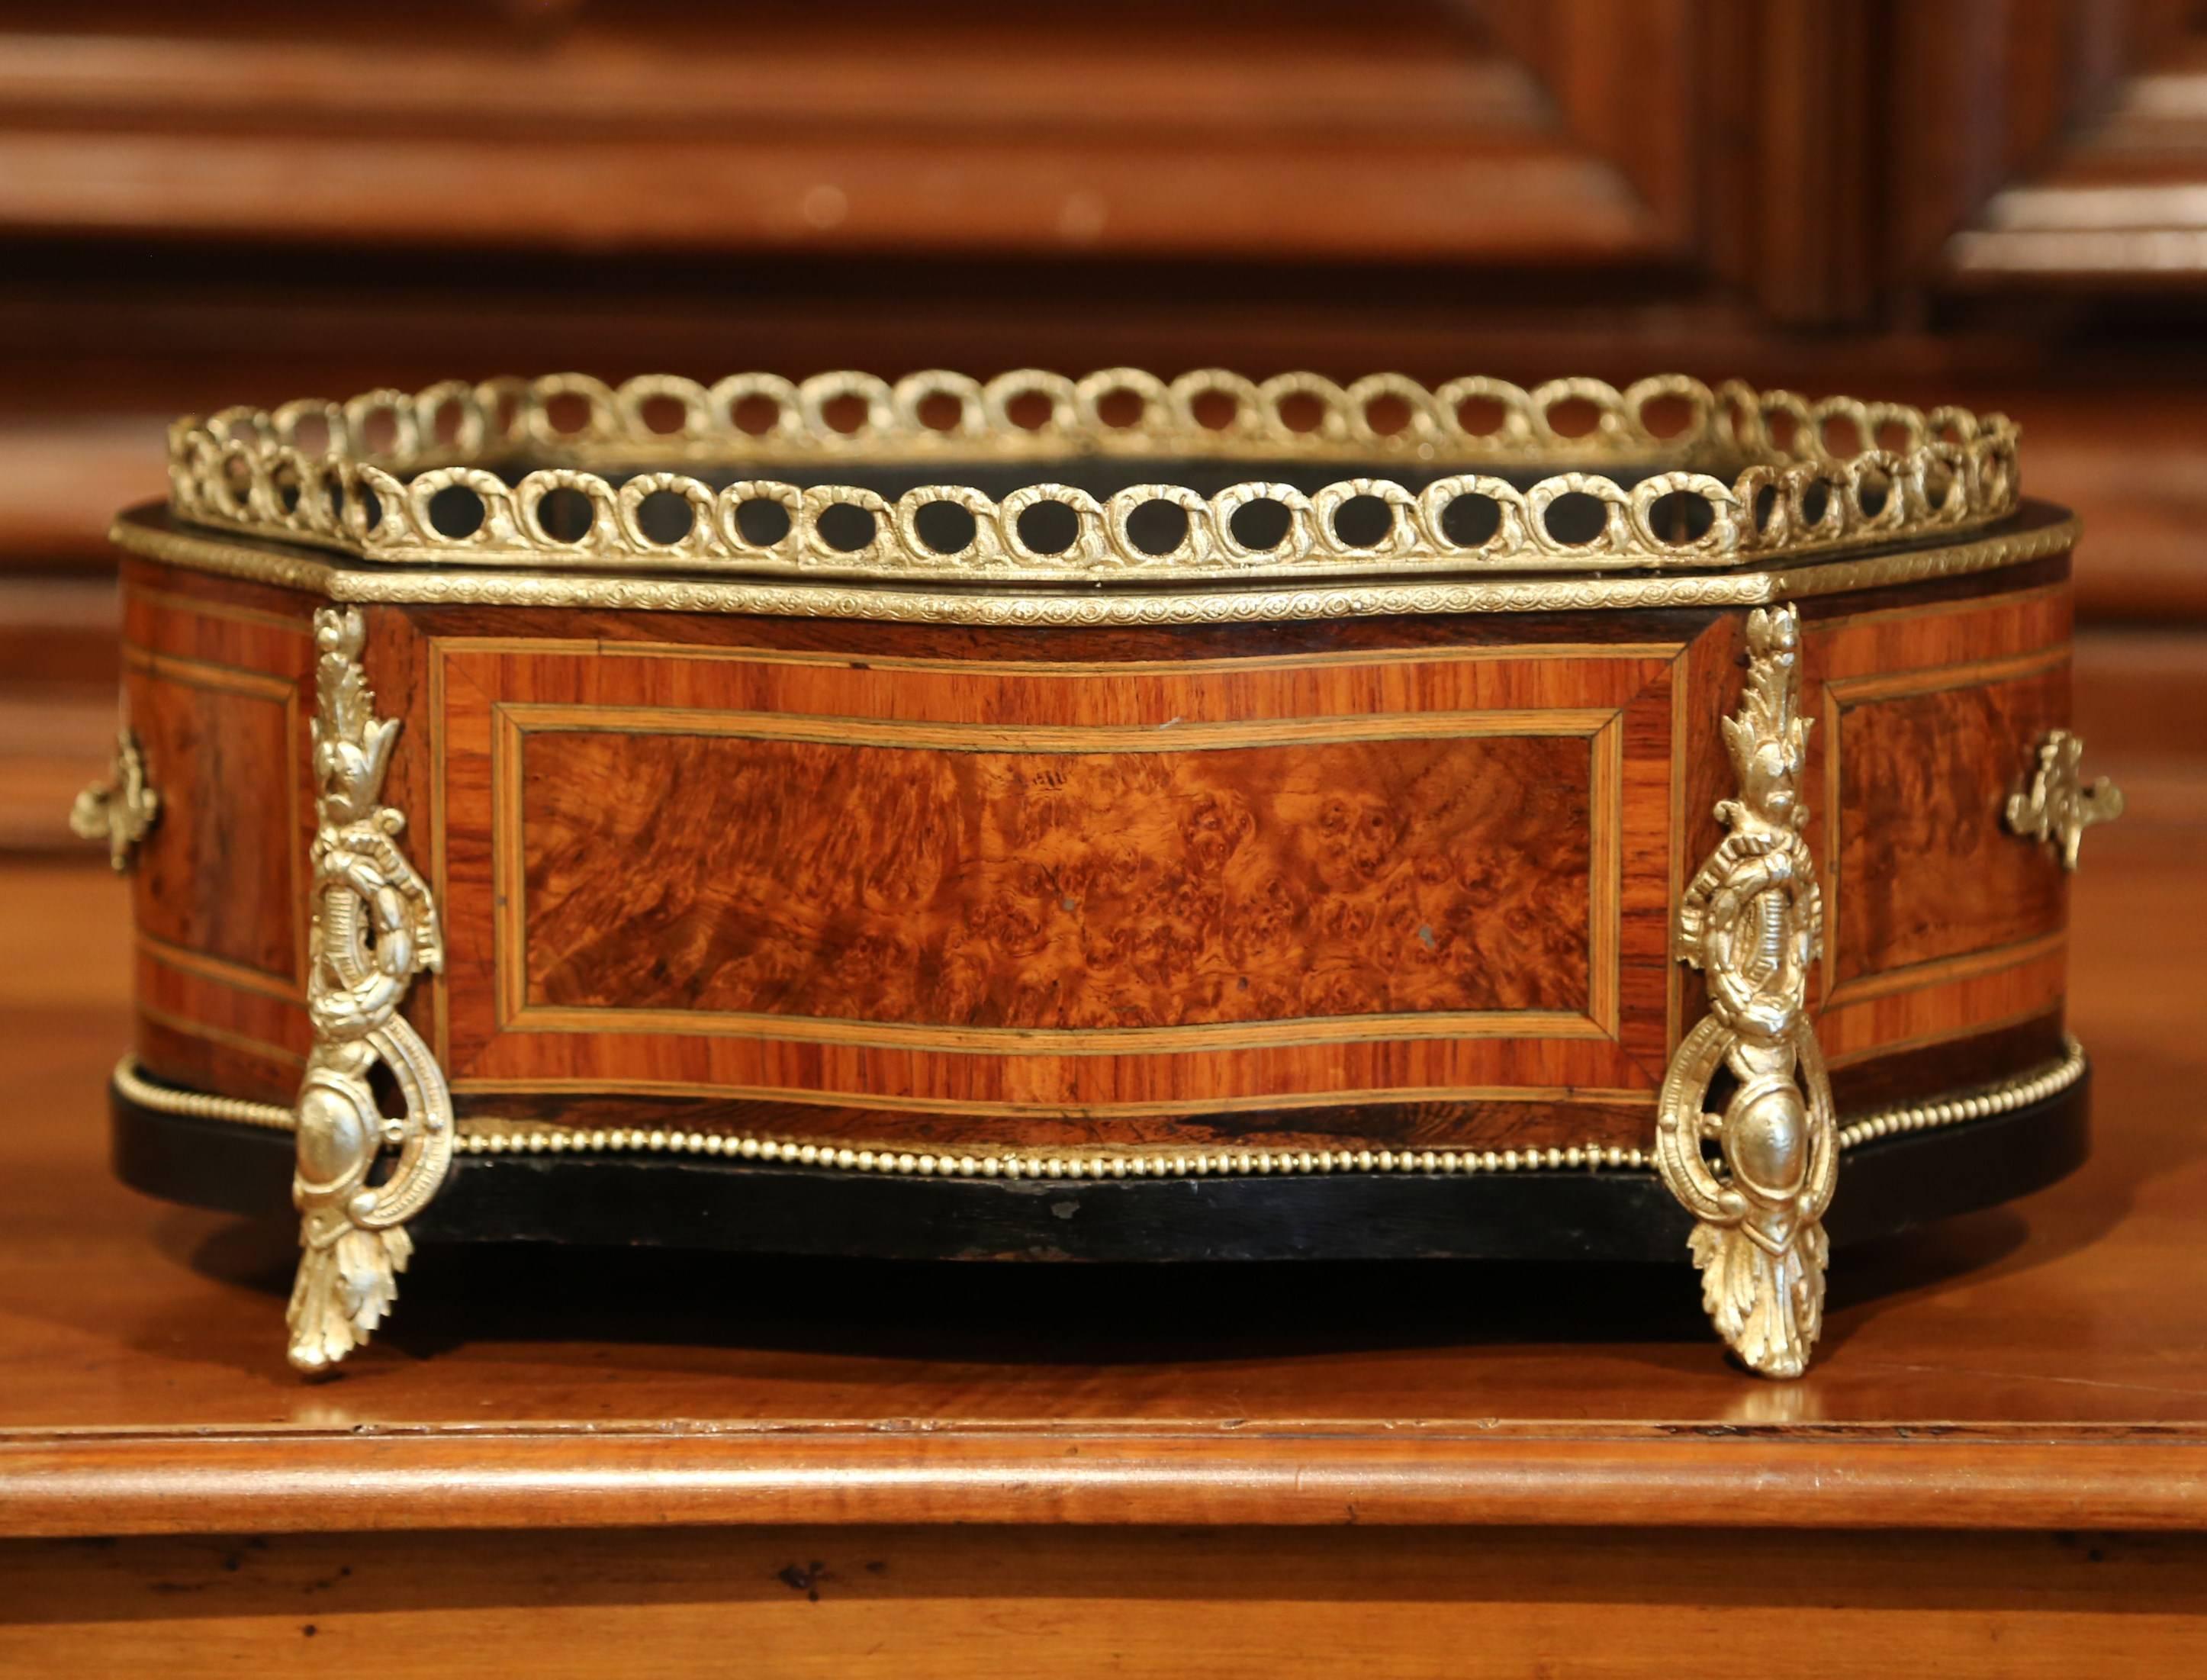 This elegant, antique fruit wood planter was crafted in France, circa 1870. Oval in shape with bombe sides, the Napoleon III jardinière with side handles, features a bronze gallery around the top rim, and geometric marquetry designs on all four